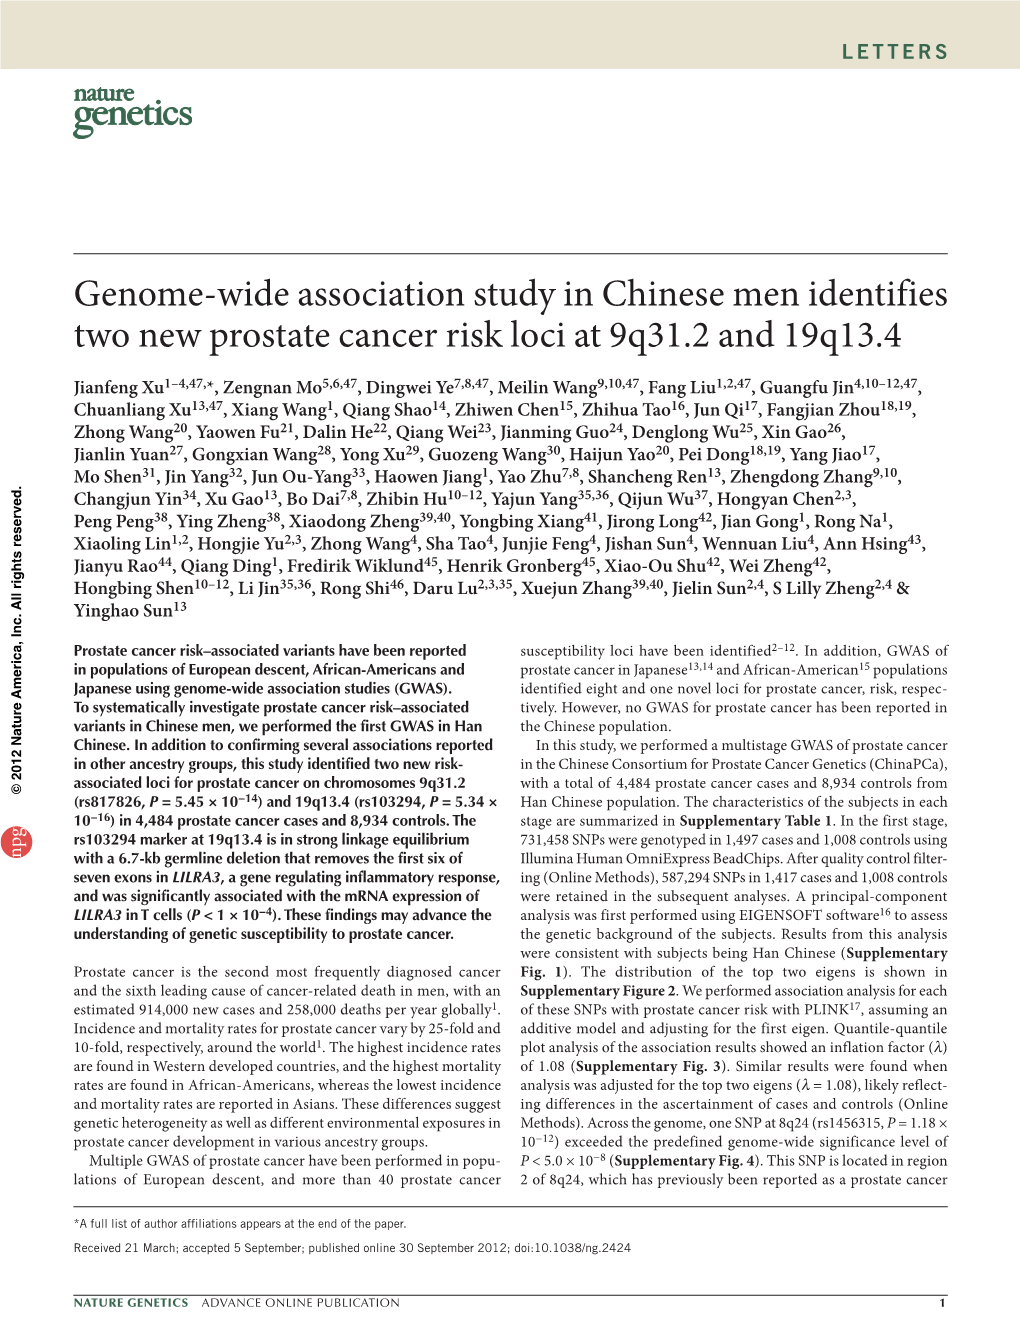 Genome-Wide Association Study in Chinese Men Identifies Two New Prostate Cancer Risk Loci at 9Q31.2 and 19Q13.4